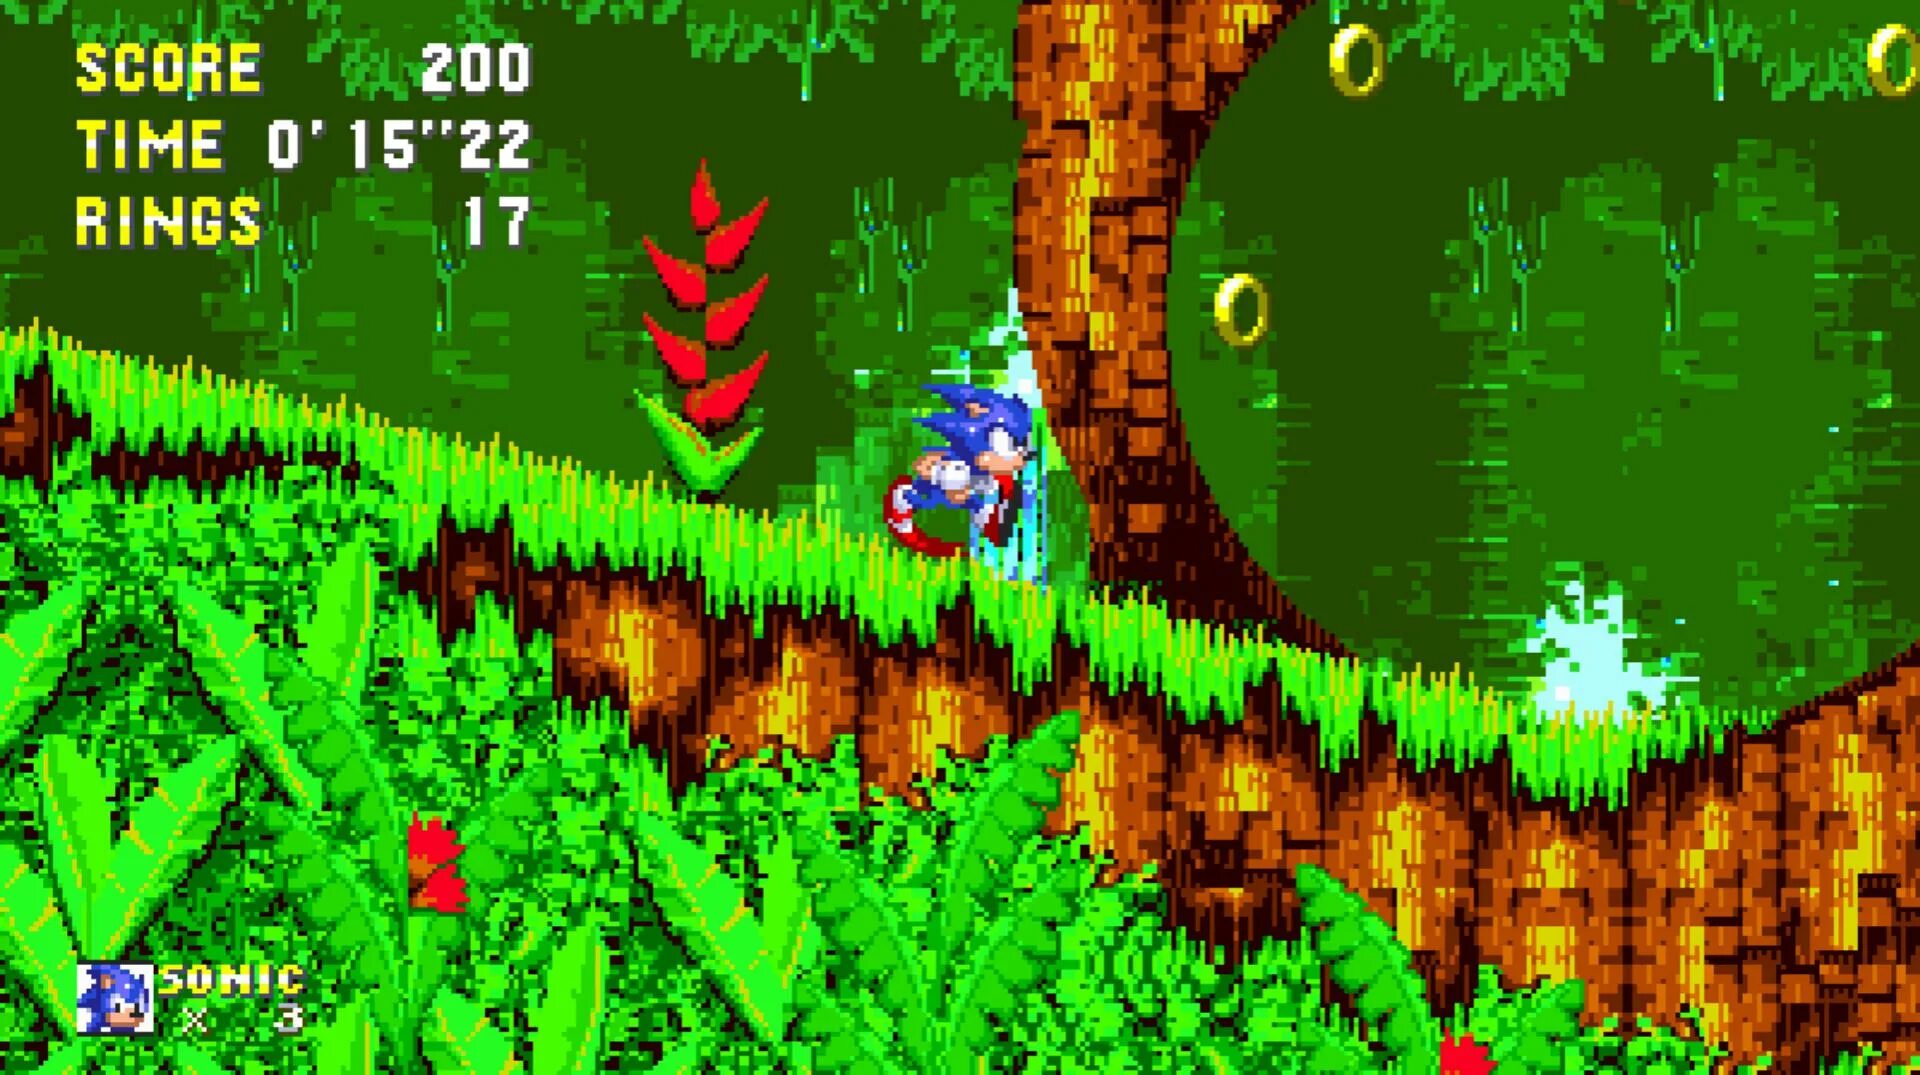 Uzmovi com sonic 3. Соник 3 АИР. Sonic 3 a.i.r. (Angel Island revisited). Sonic 3 and Knuckles. Sonic 3 Forever.